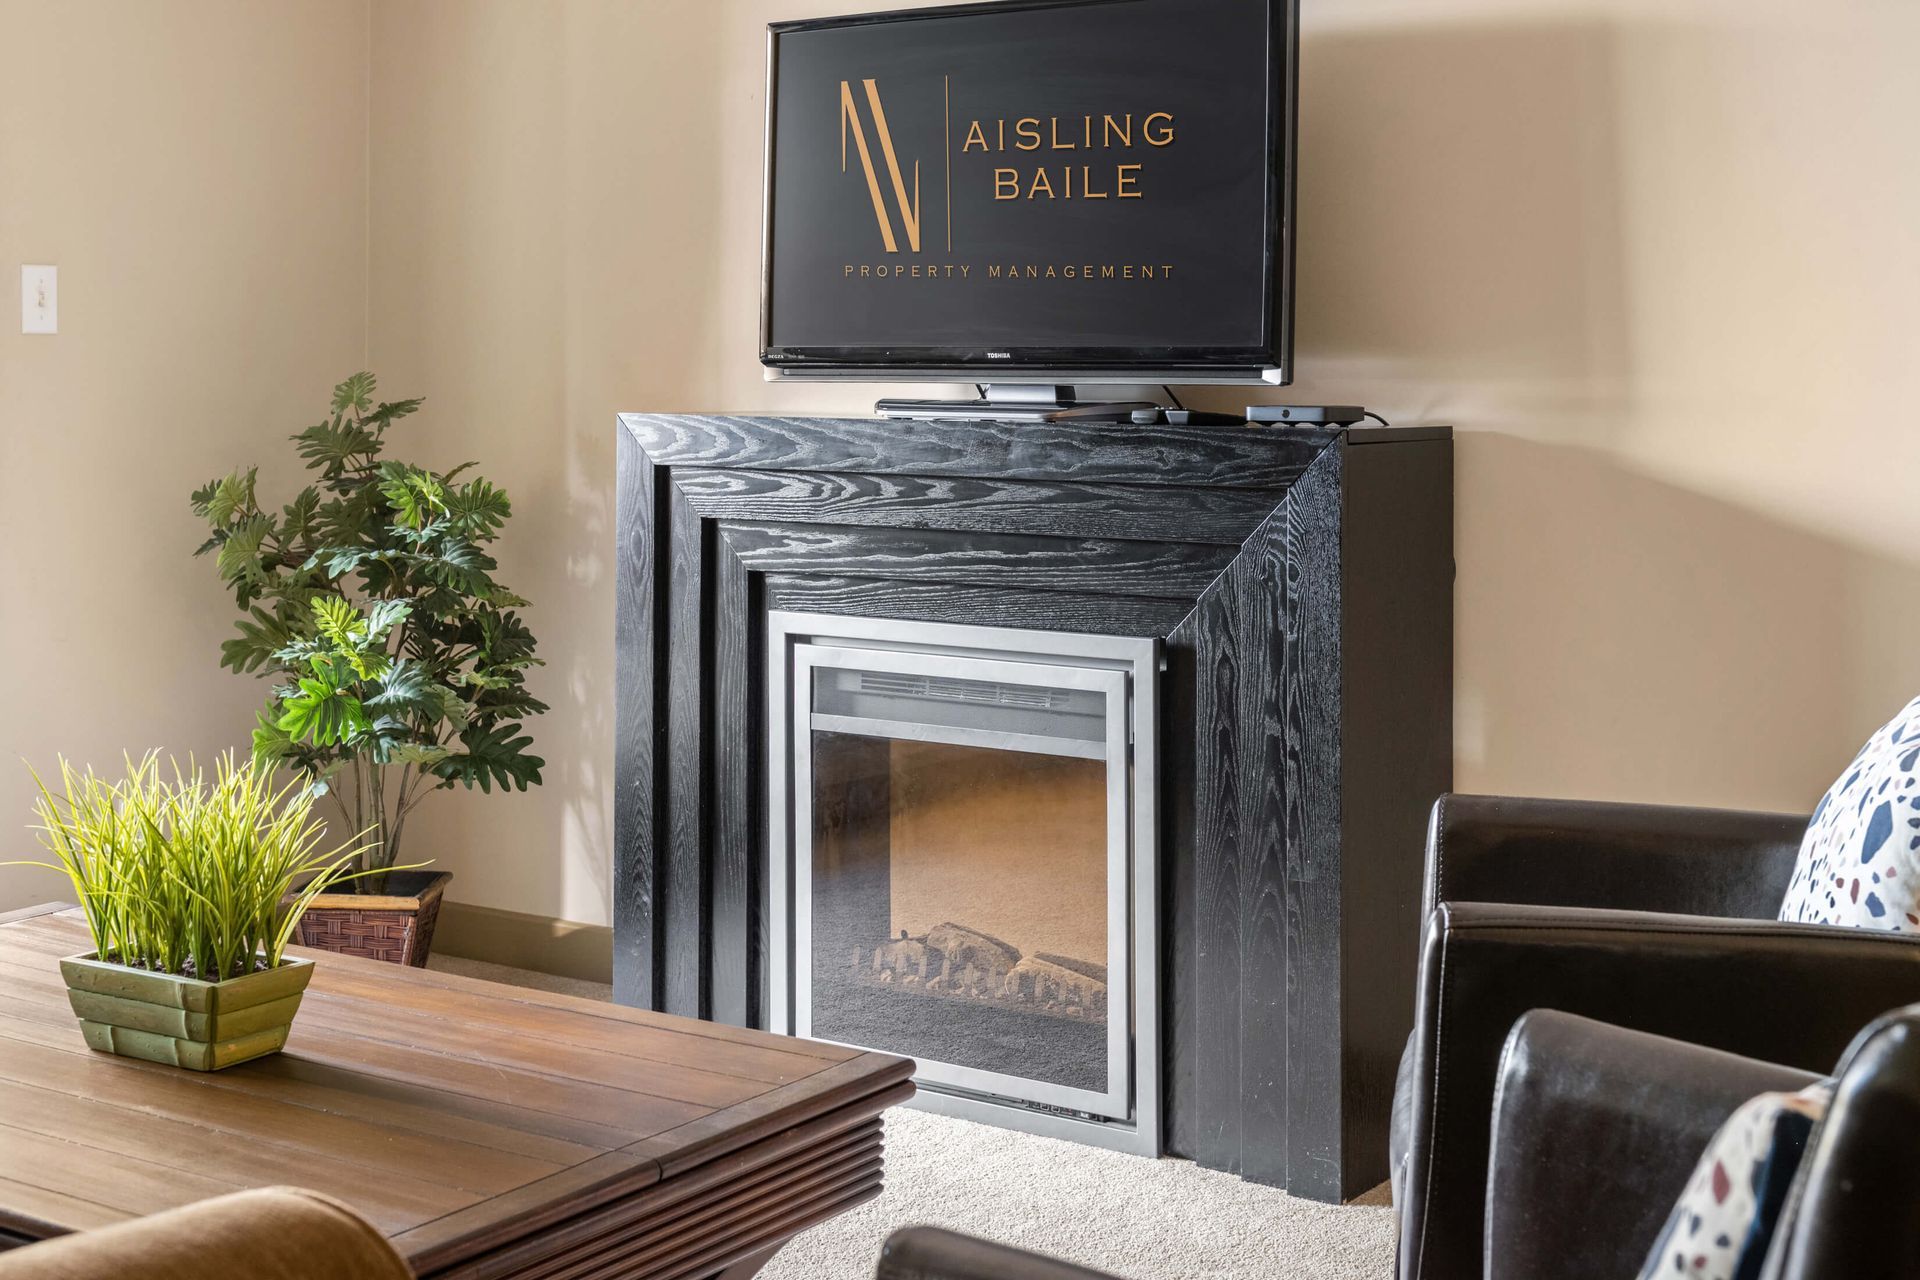 Fireplace at the Lake Windermere Pointe Condos in Invermere, BC managed by Aisling Baile Property Management